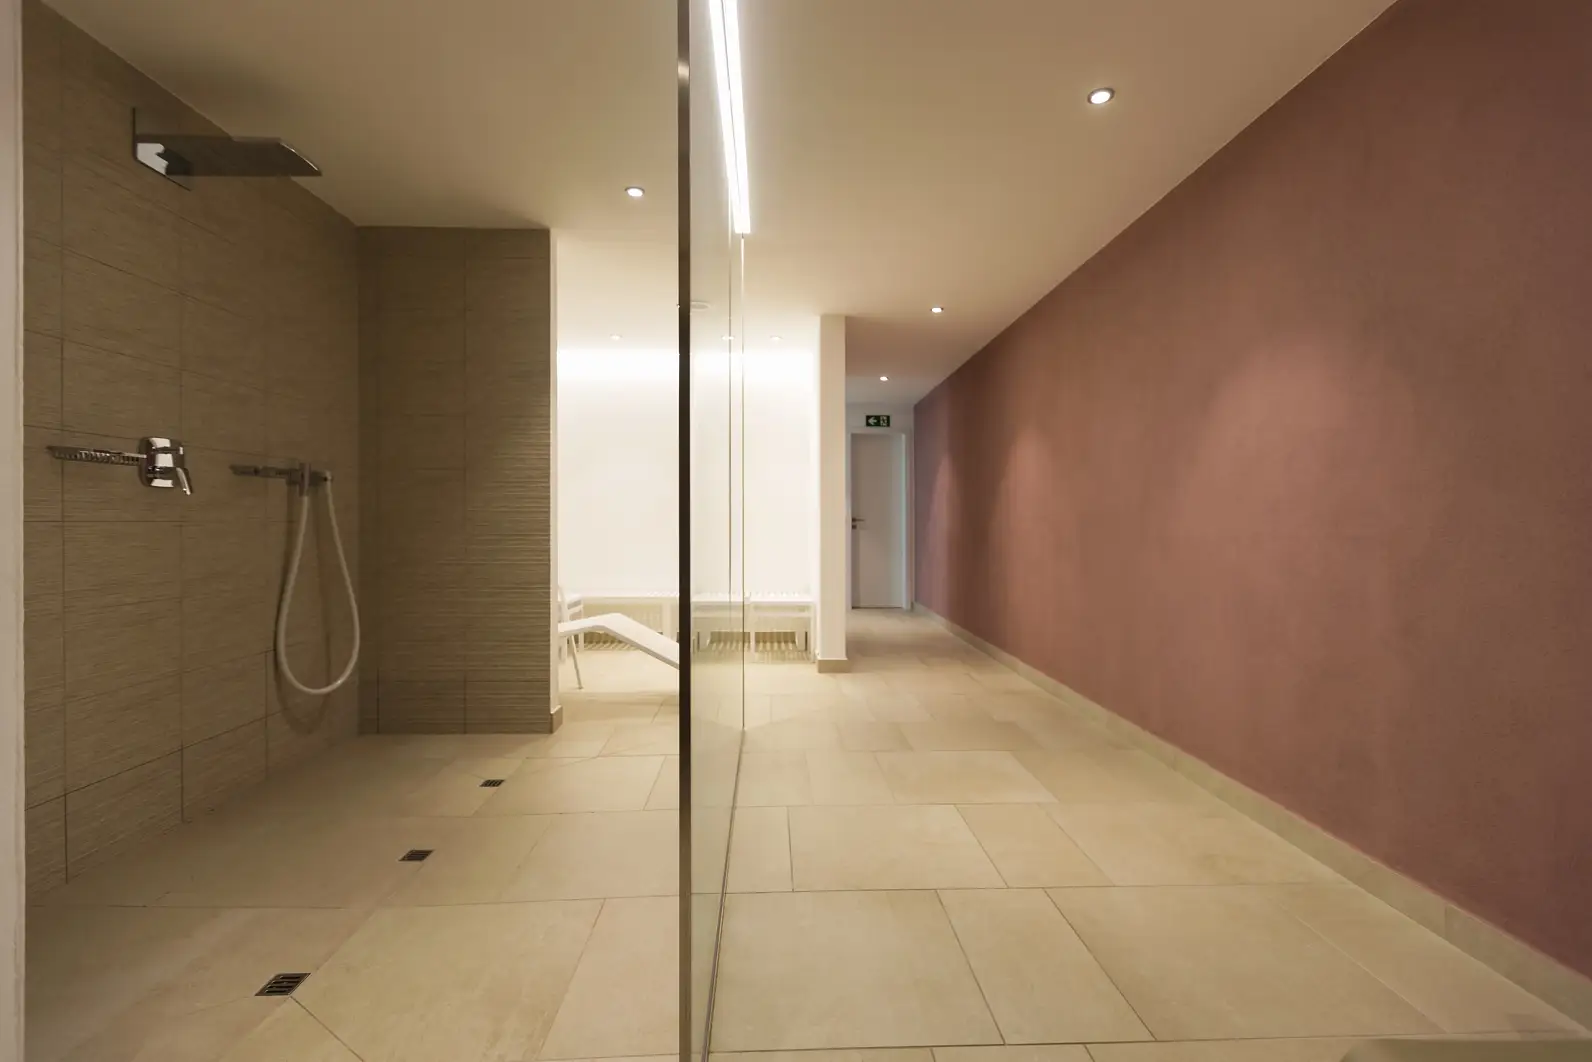 Spa shower in a private residence. Nobody inside